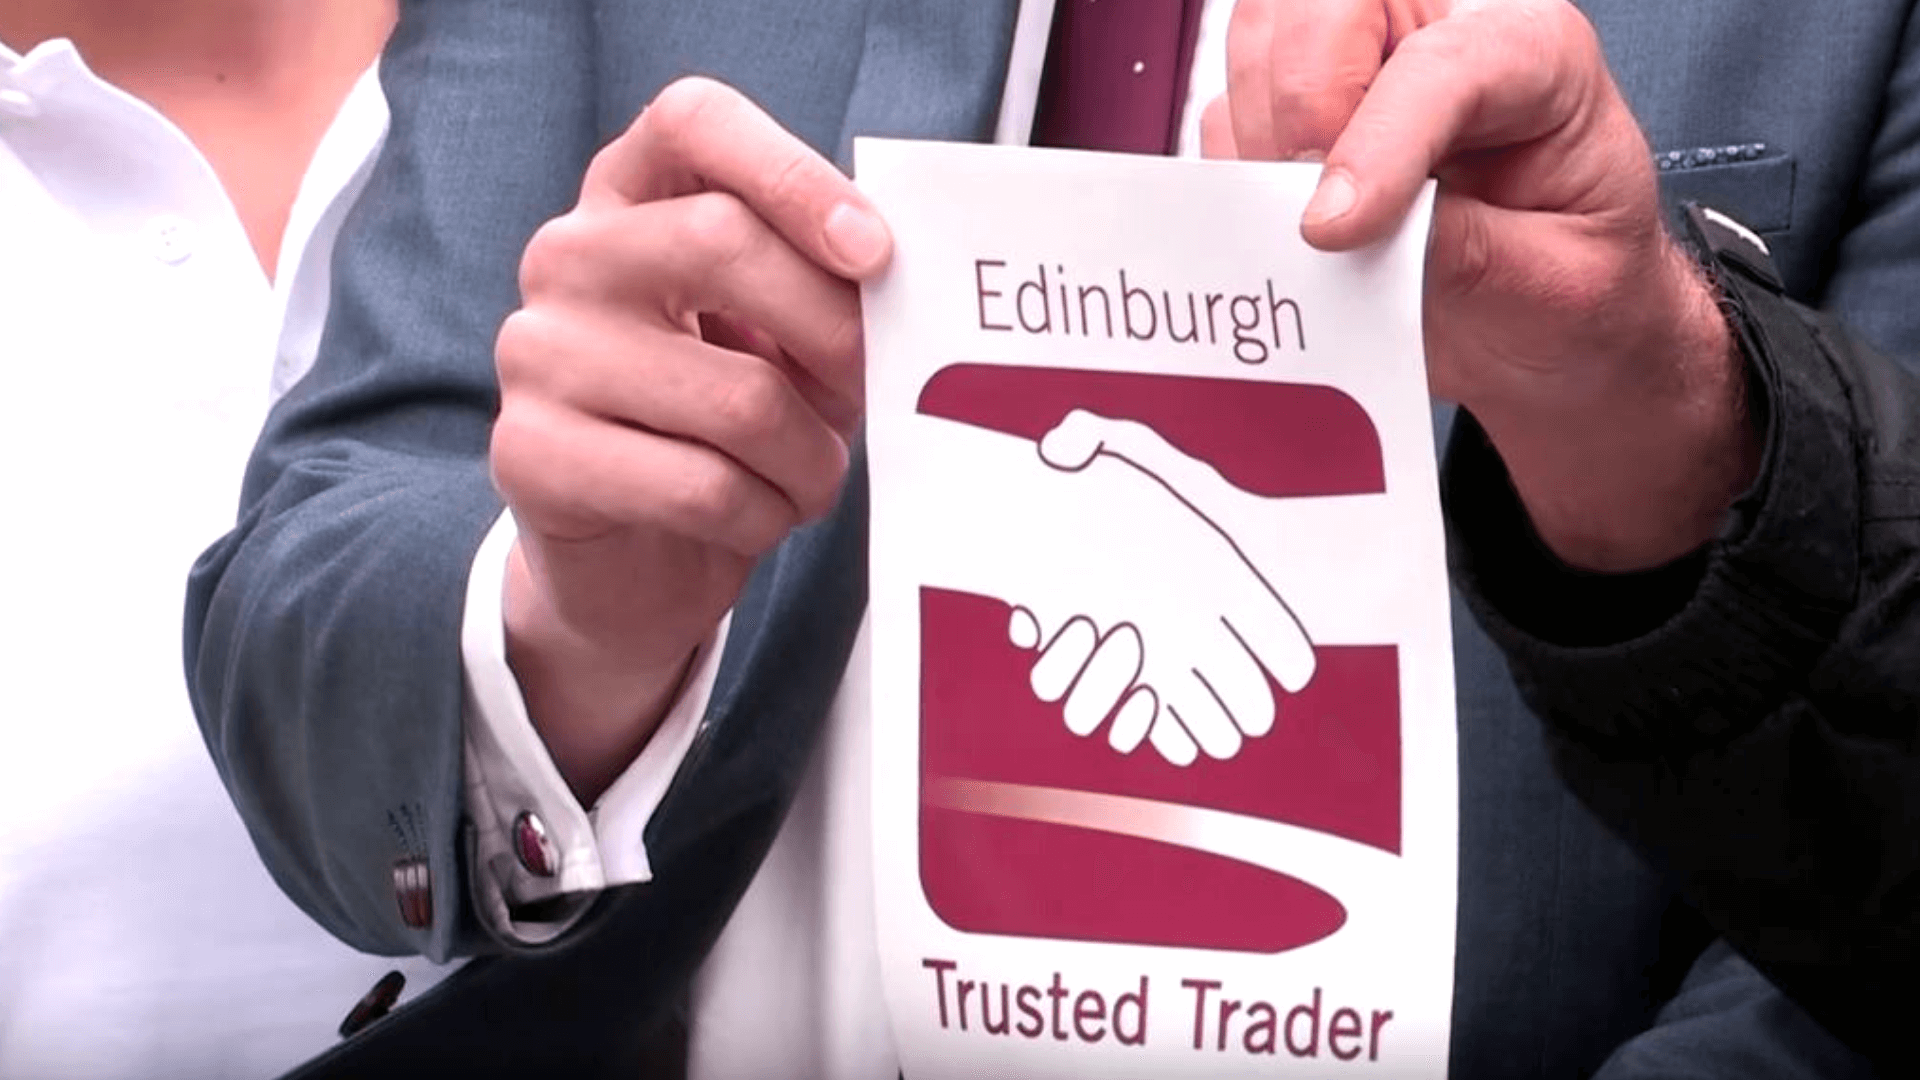 B&M Joiners & Building Services & Edinburgh Trusted Trader